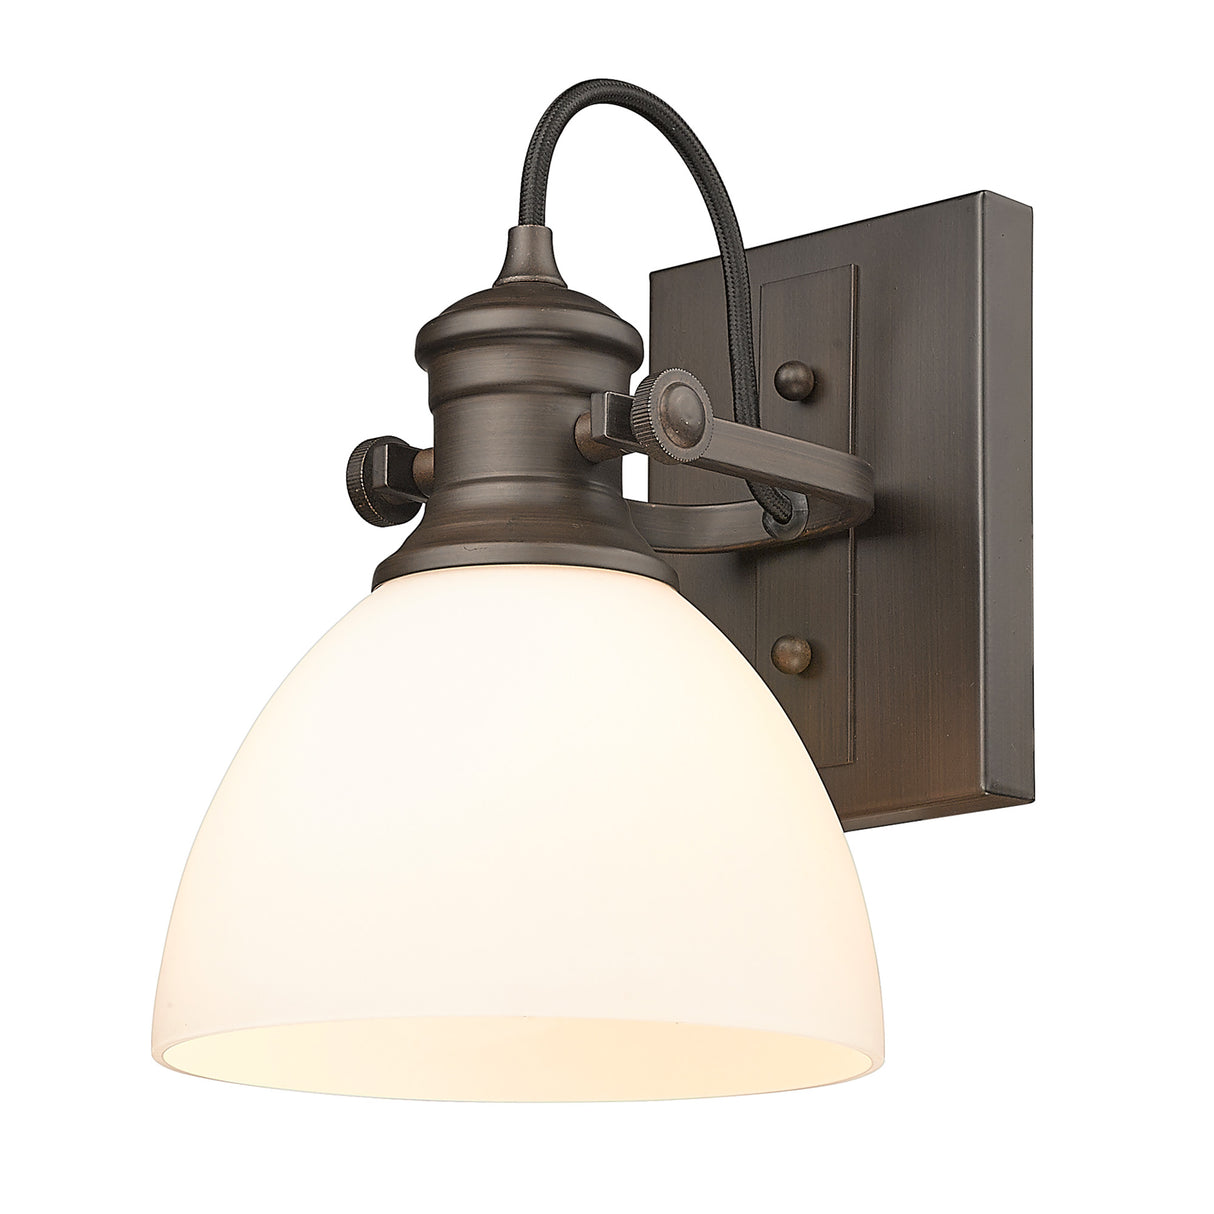 Hines 1-Light Semi-Flush in Rubbed Bronze with Opal Glass